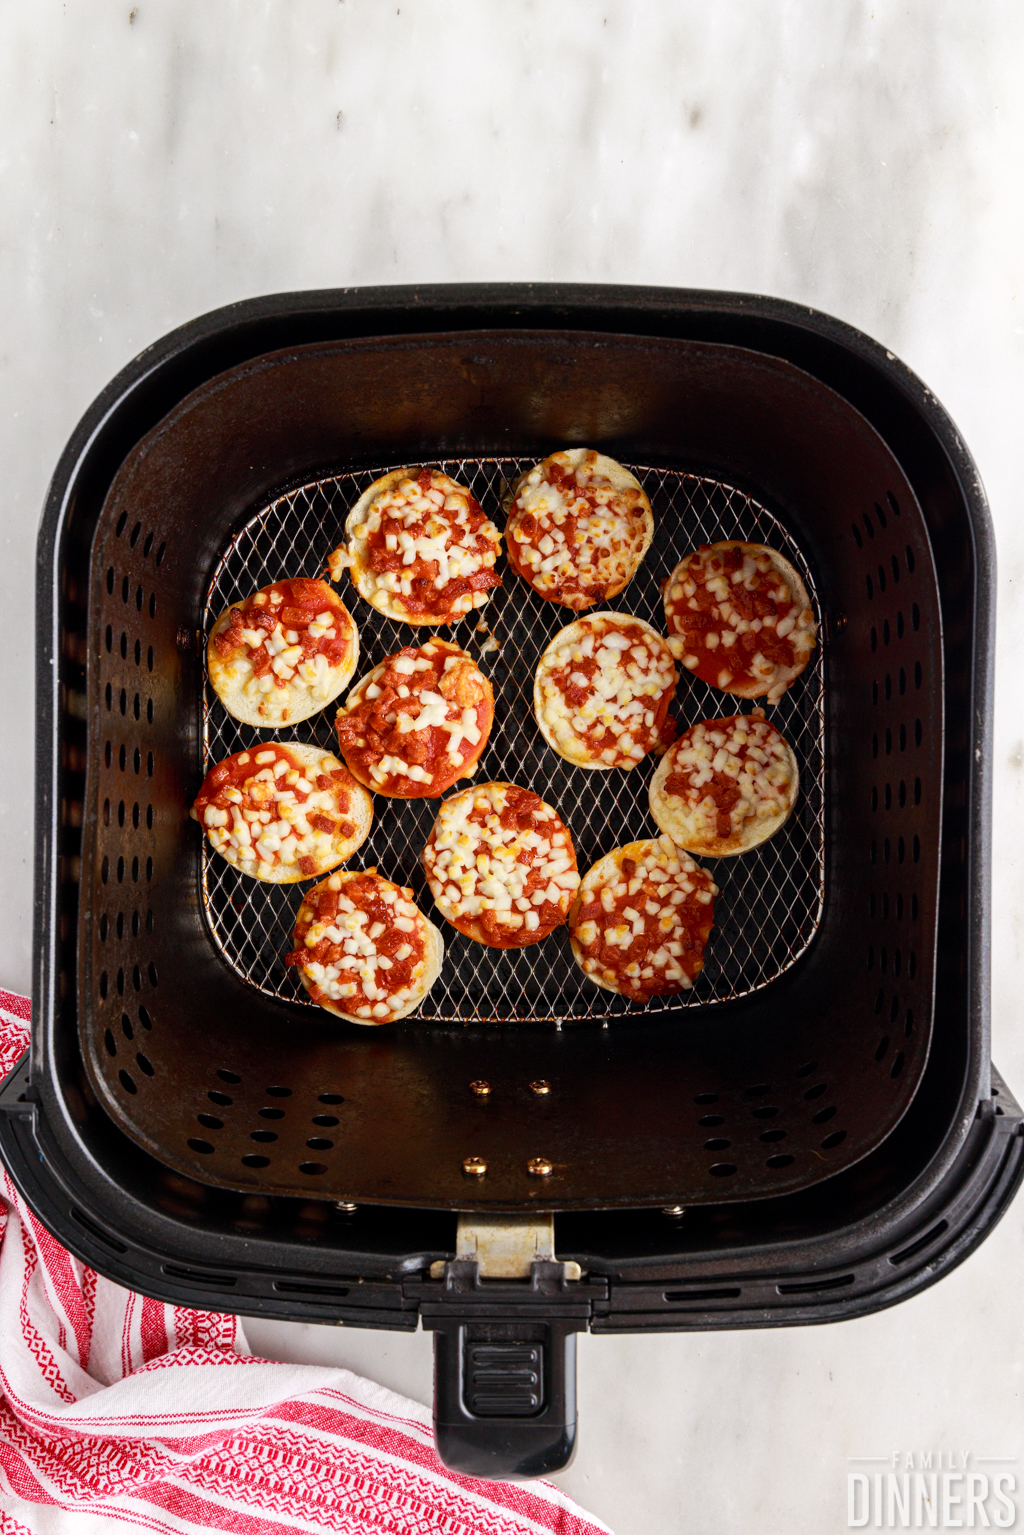 Cooked bagel bites in the air fryer basket.